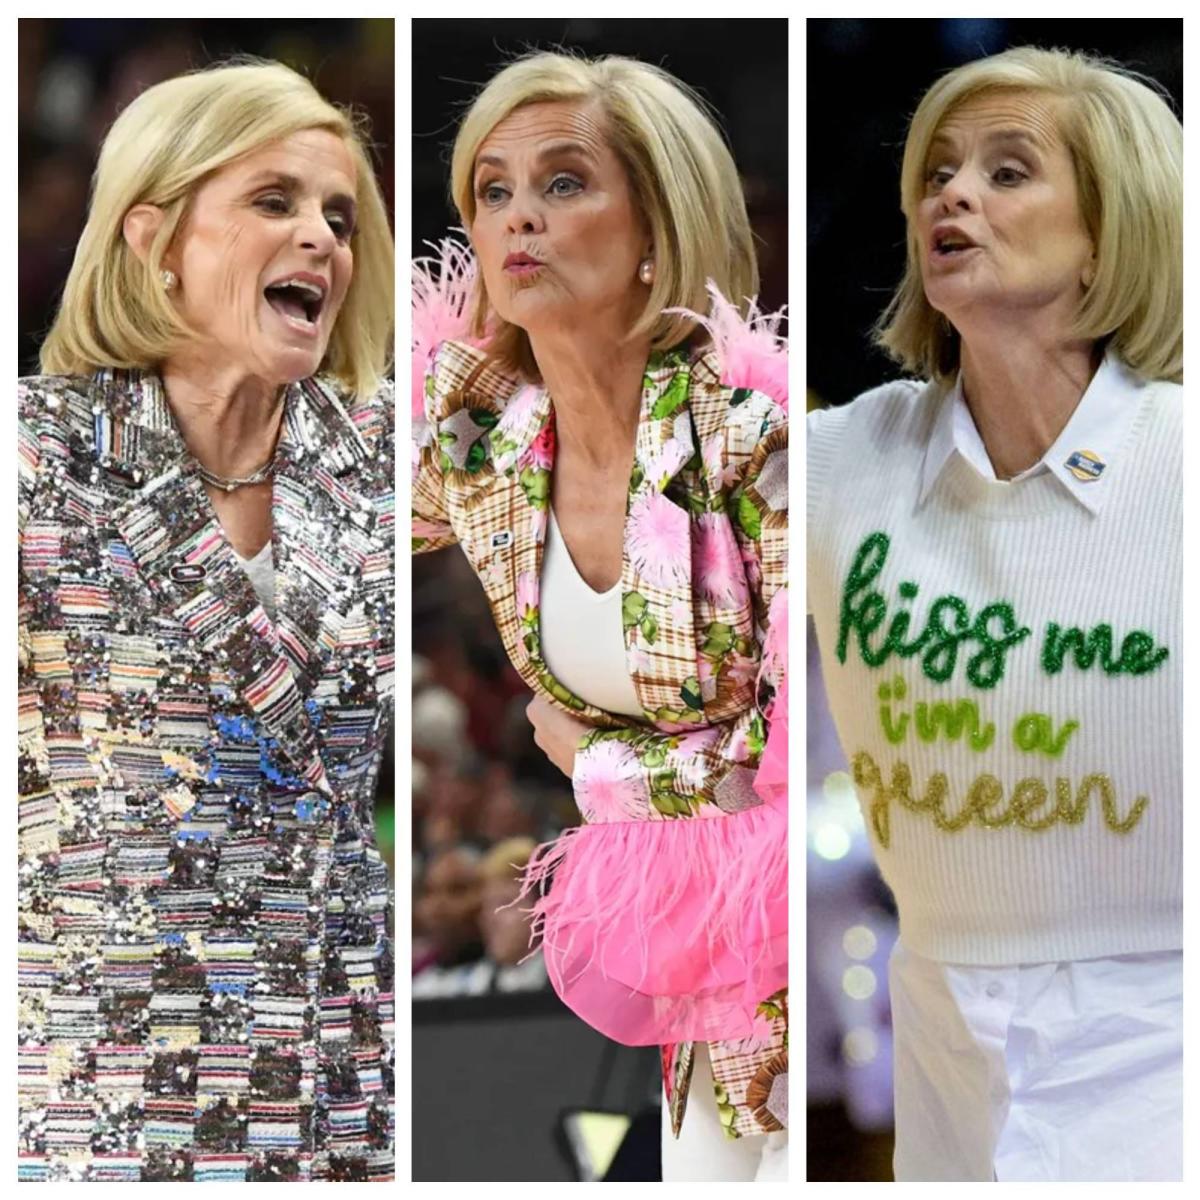 Meet the designers behind LSU coach Kim Mulkey’s sizzling March Madness outfits